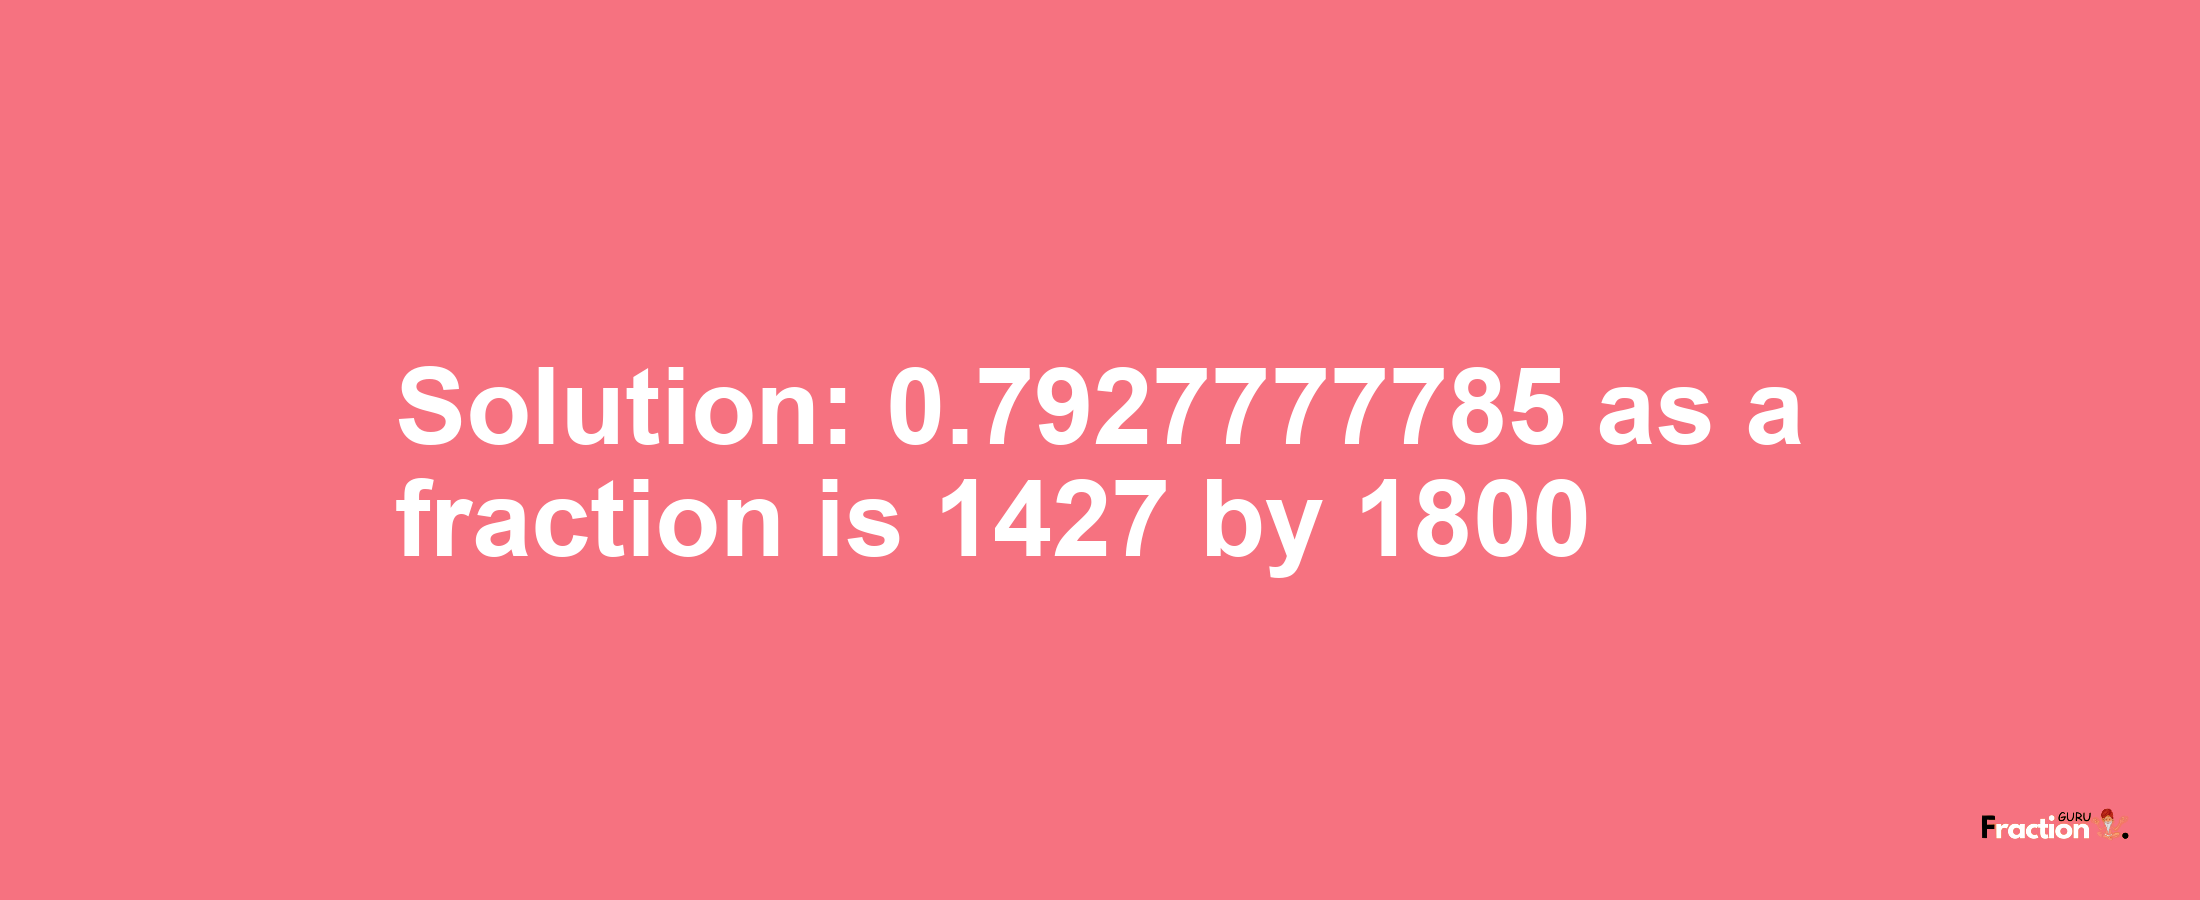 Solution:0.7927777785 as a fraction is 1427/1800